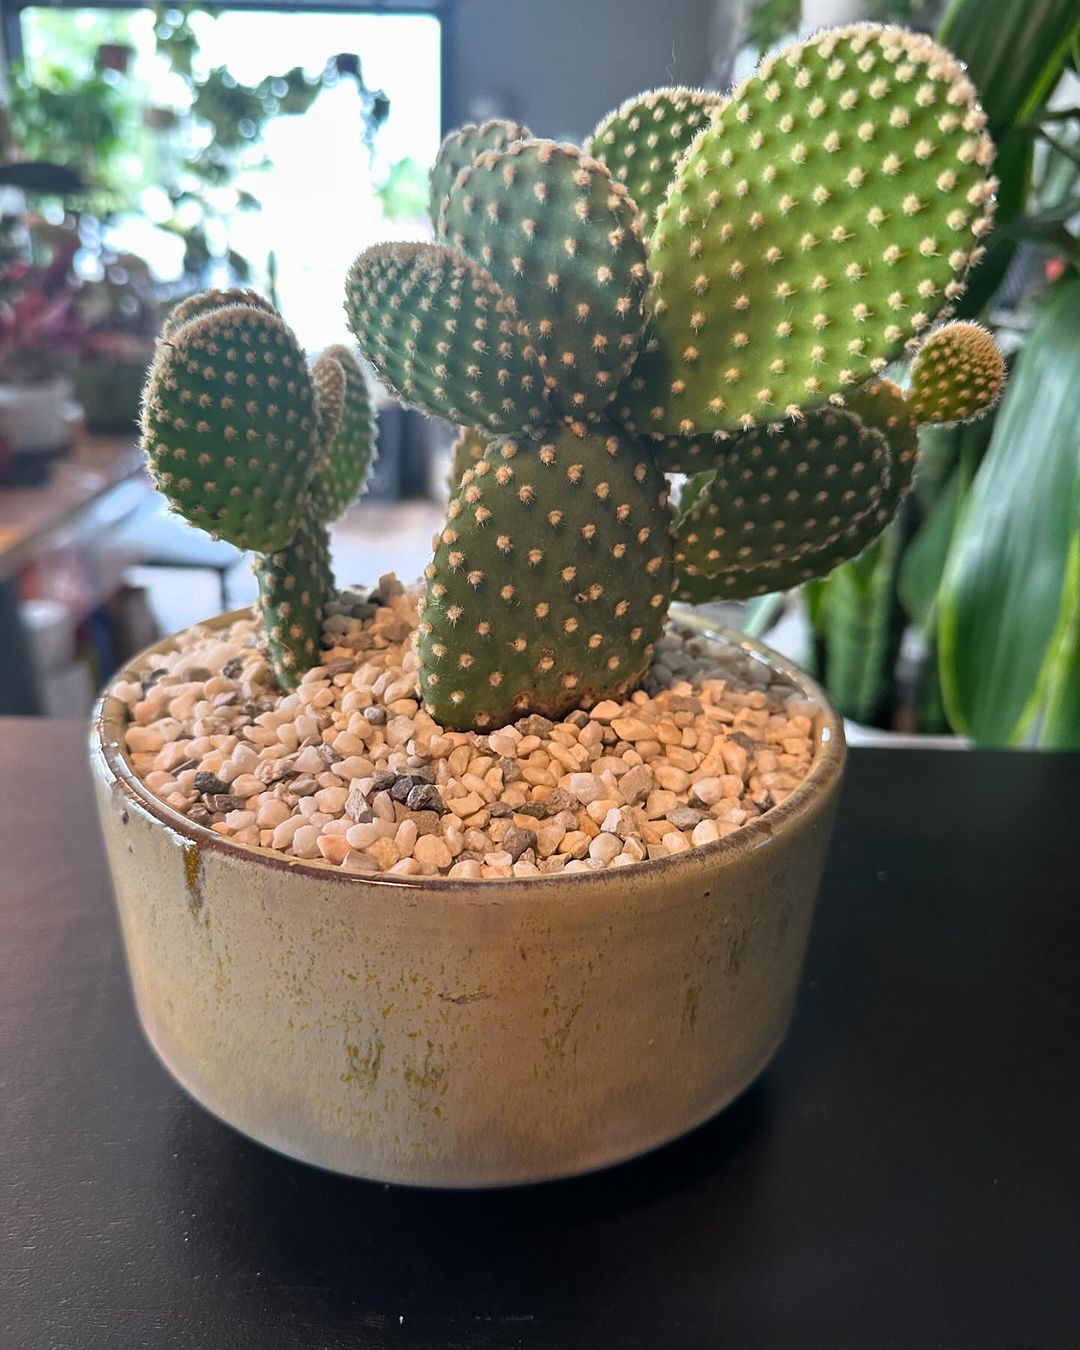 mage of a tiny Bunny Ears Cactus in a pot on a table.